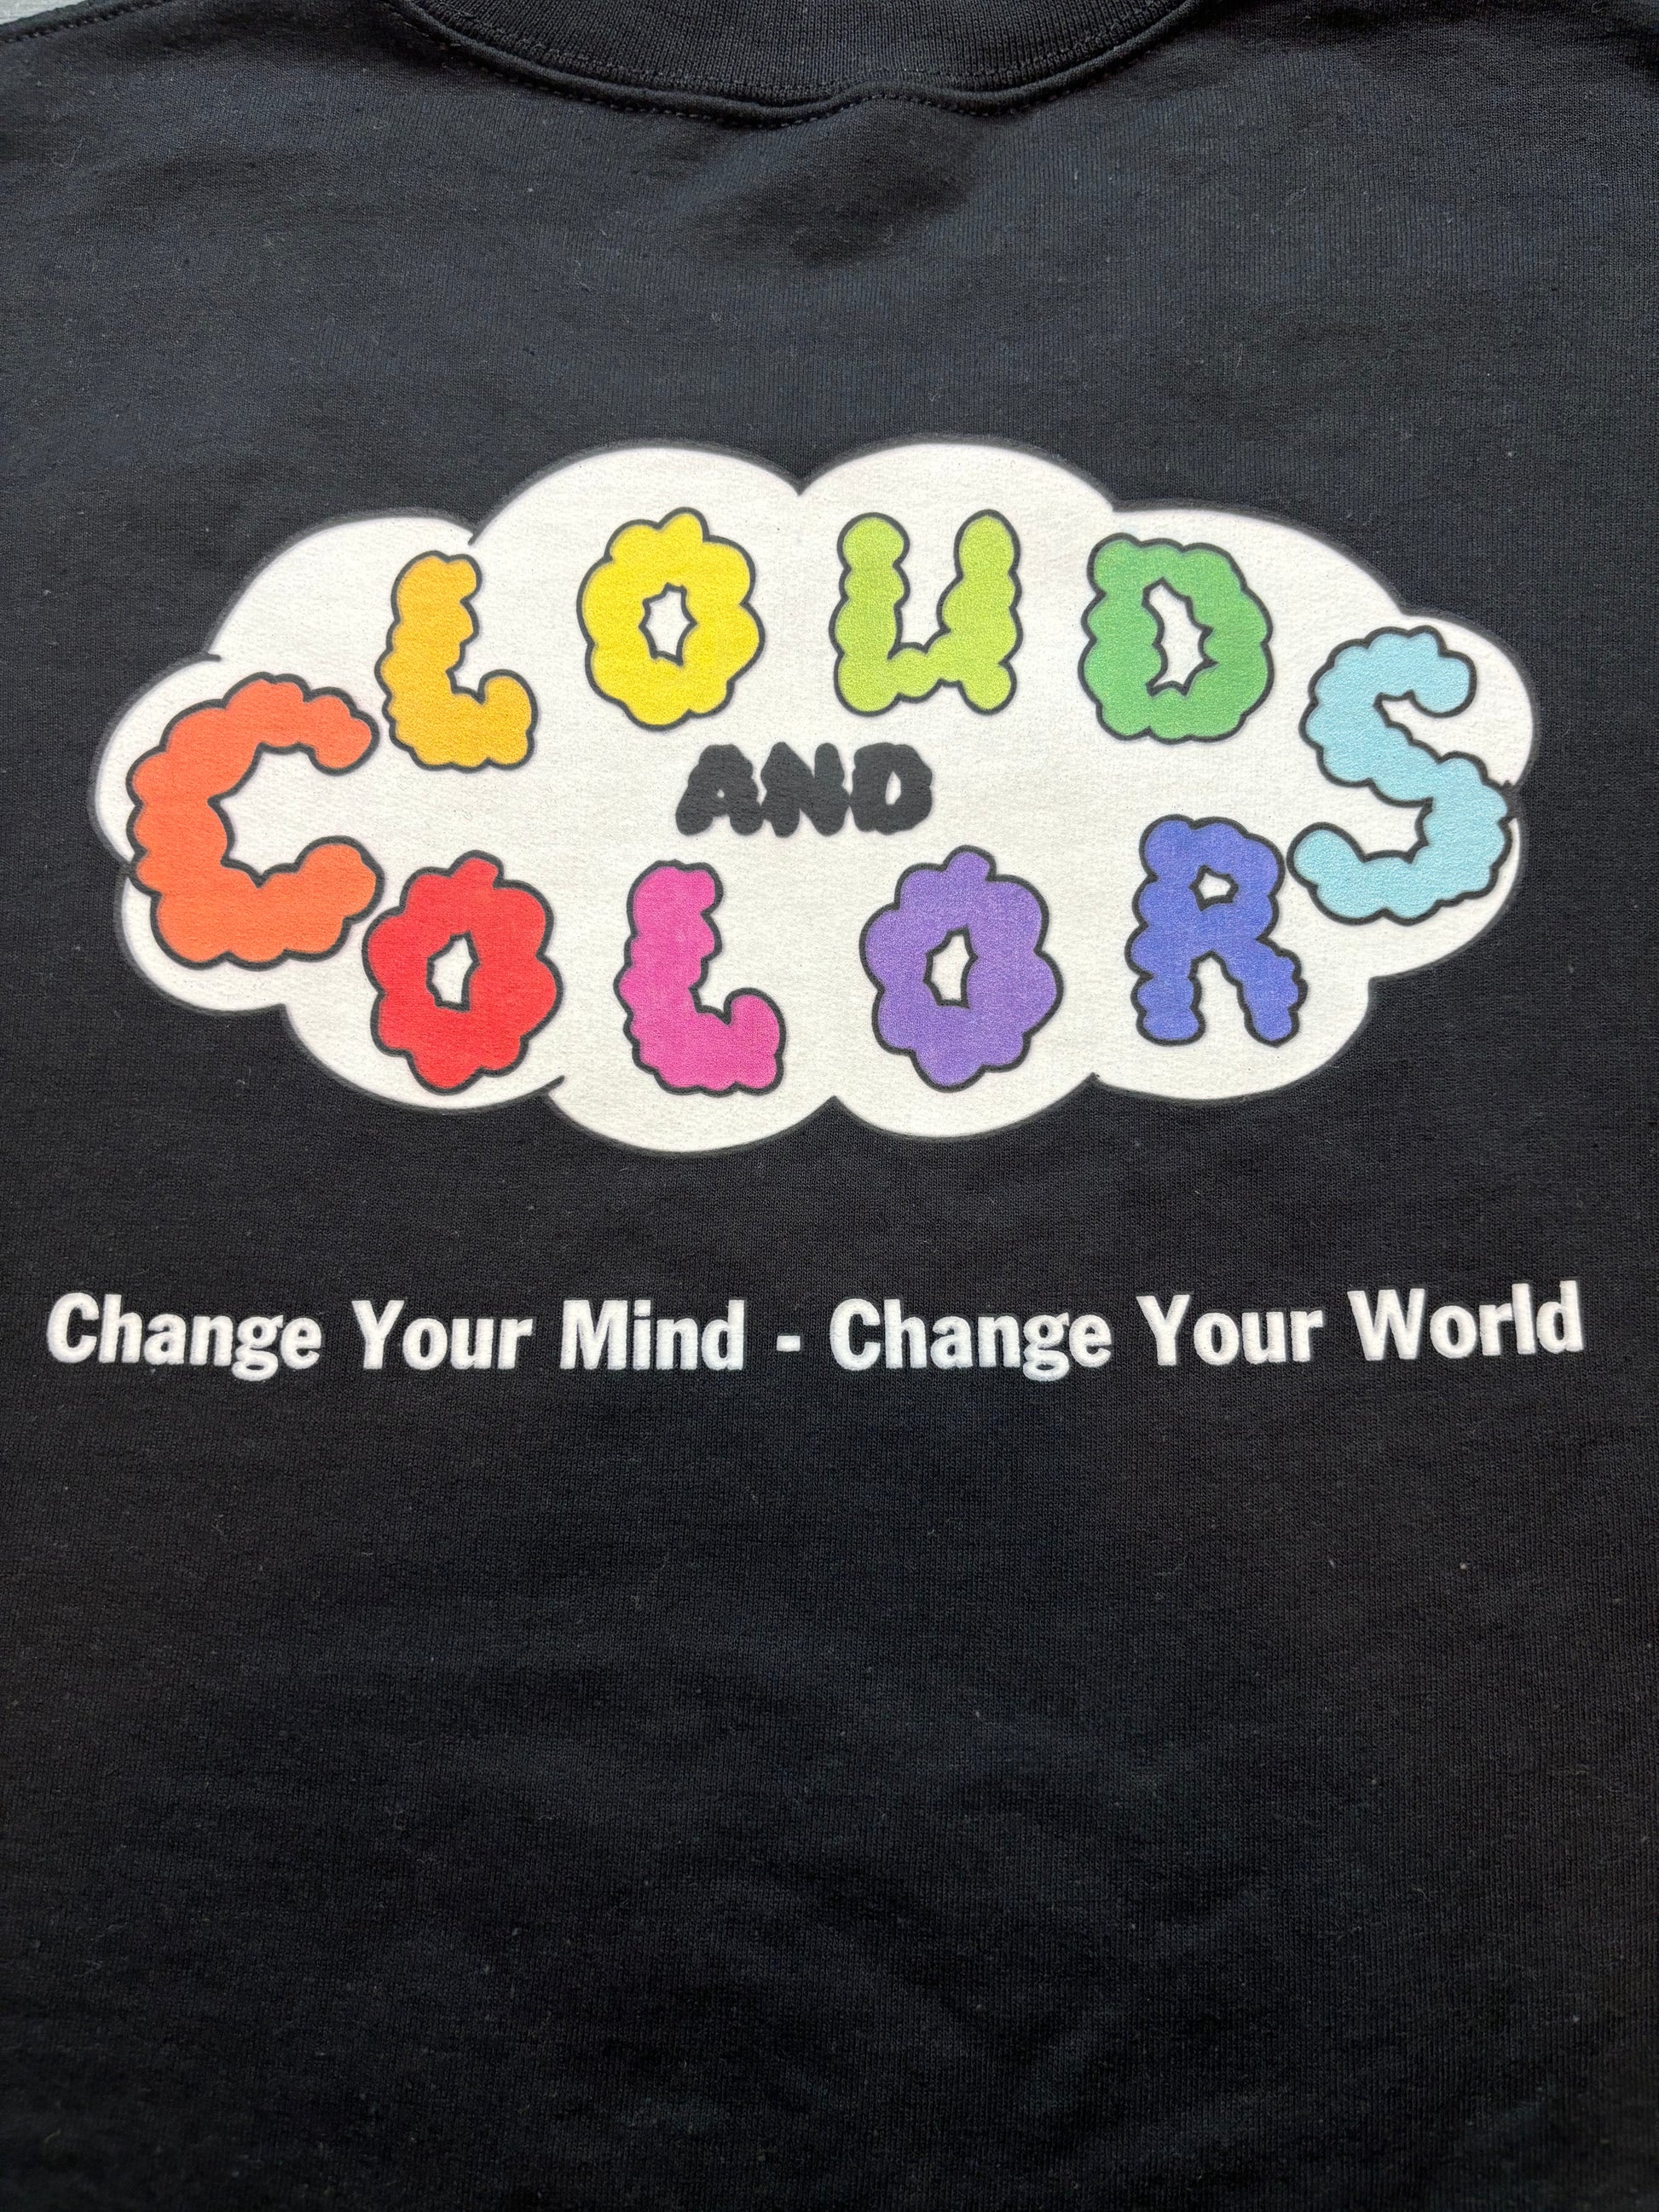 Clouds and Colors Crewneck - Black - Clouds and Colors Clothing